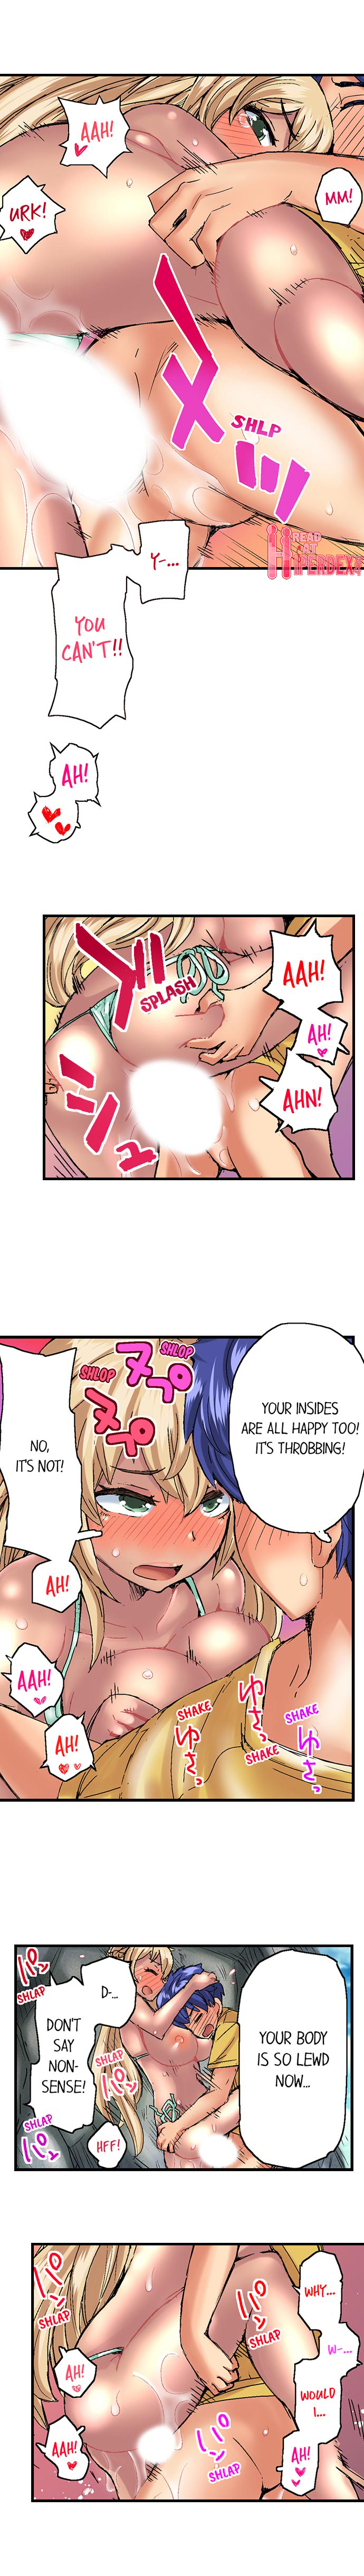 Taking a Hot Tanned Chick’s Virginity - Chapter 18 Page 4